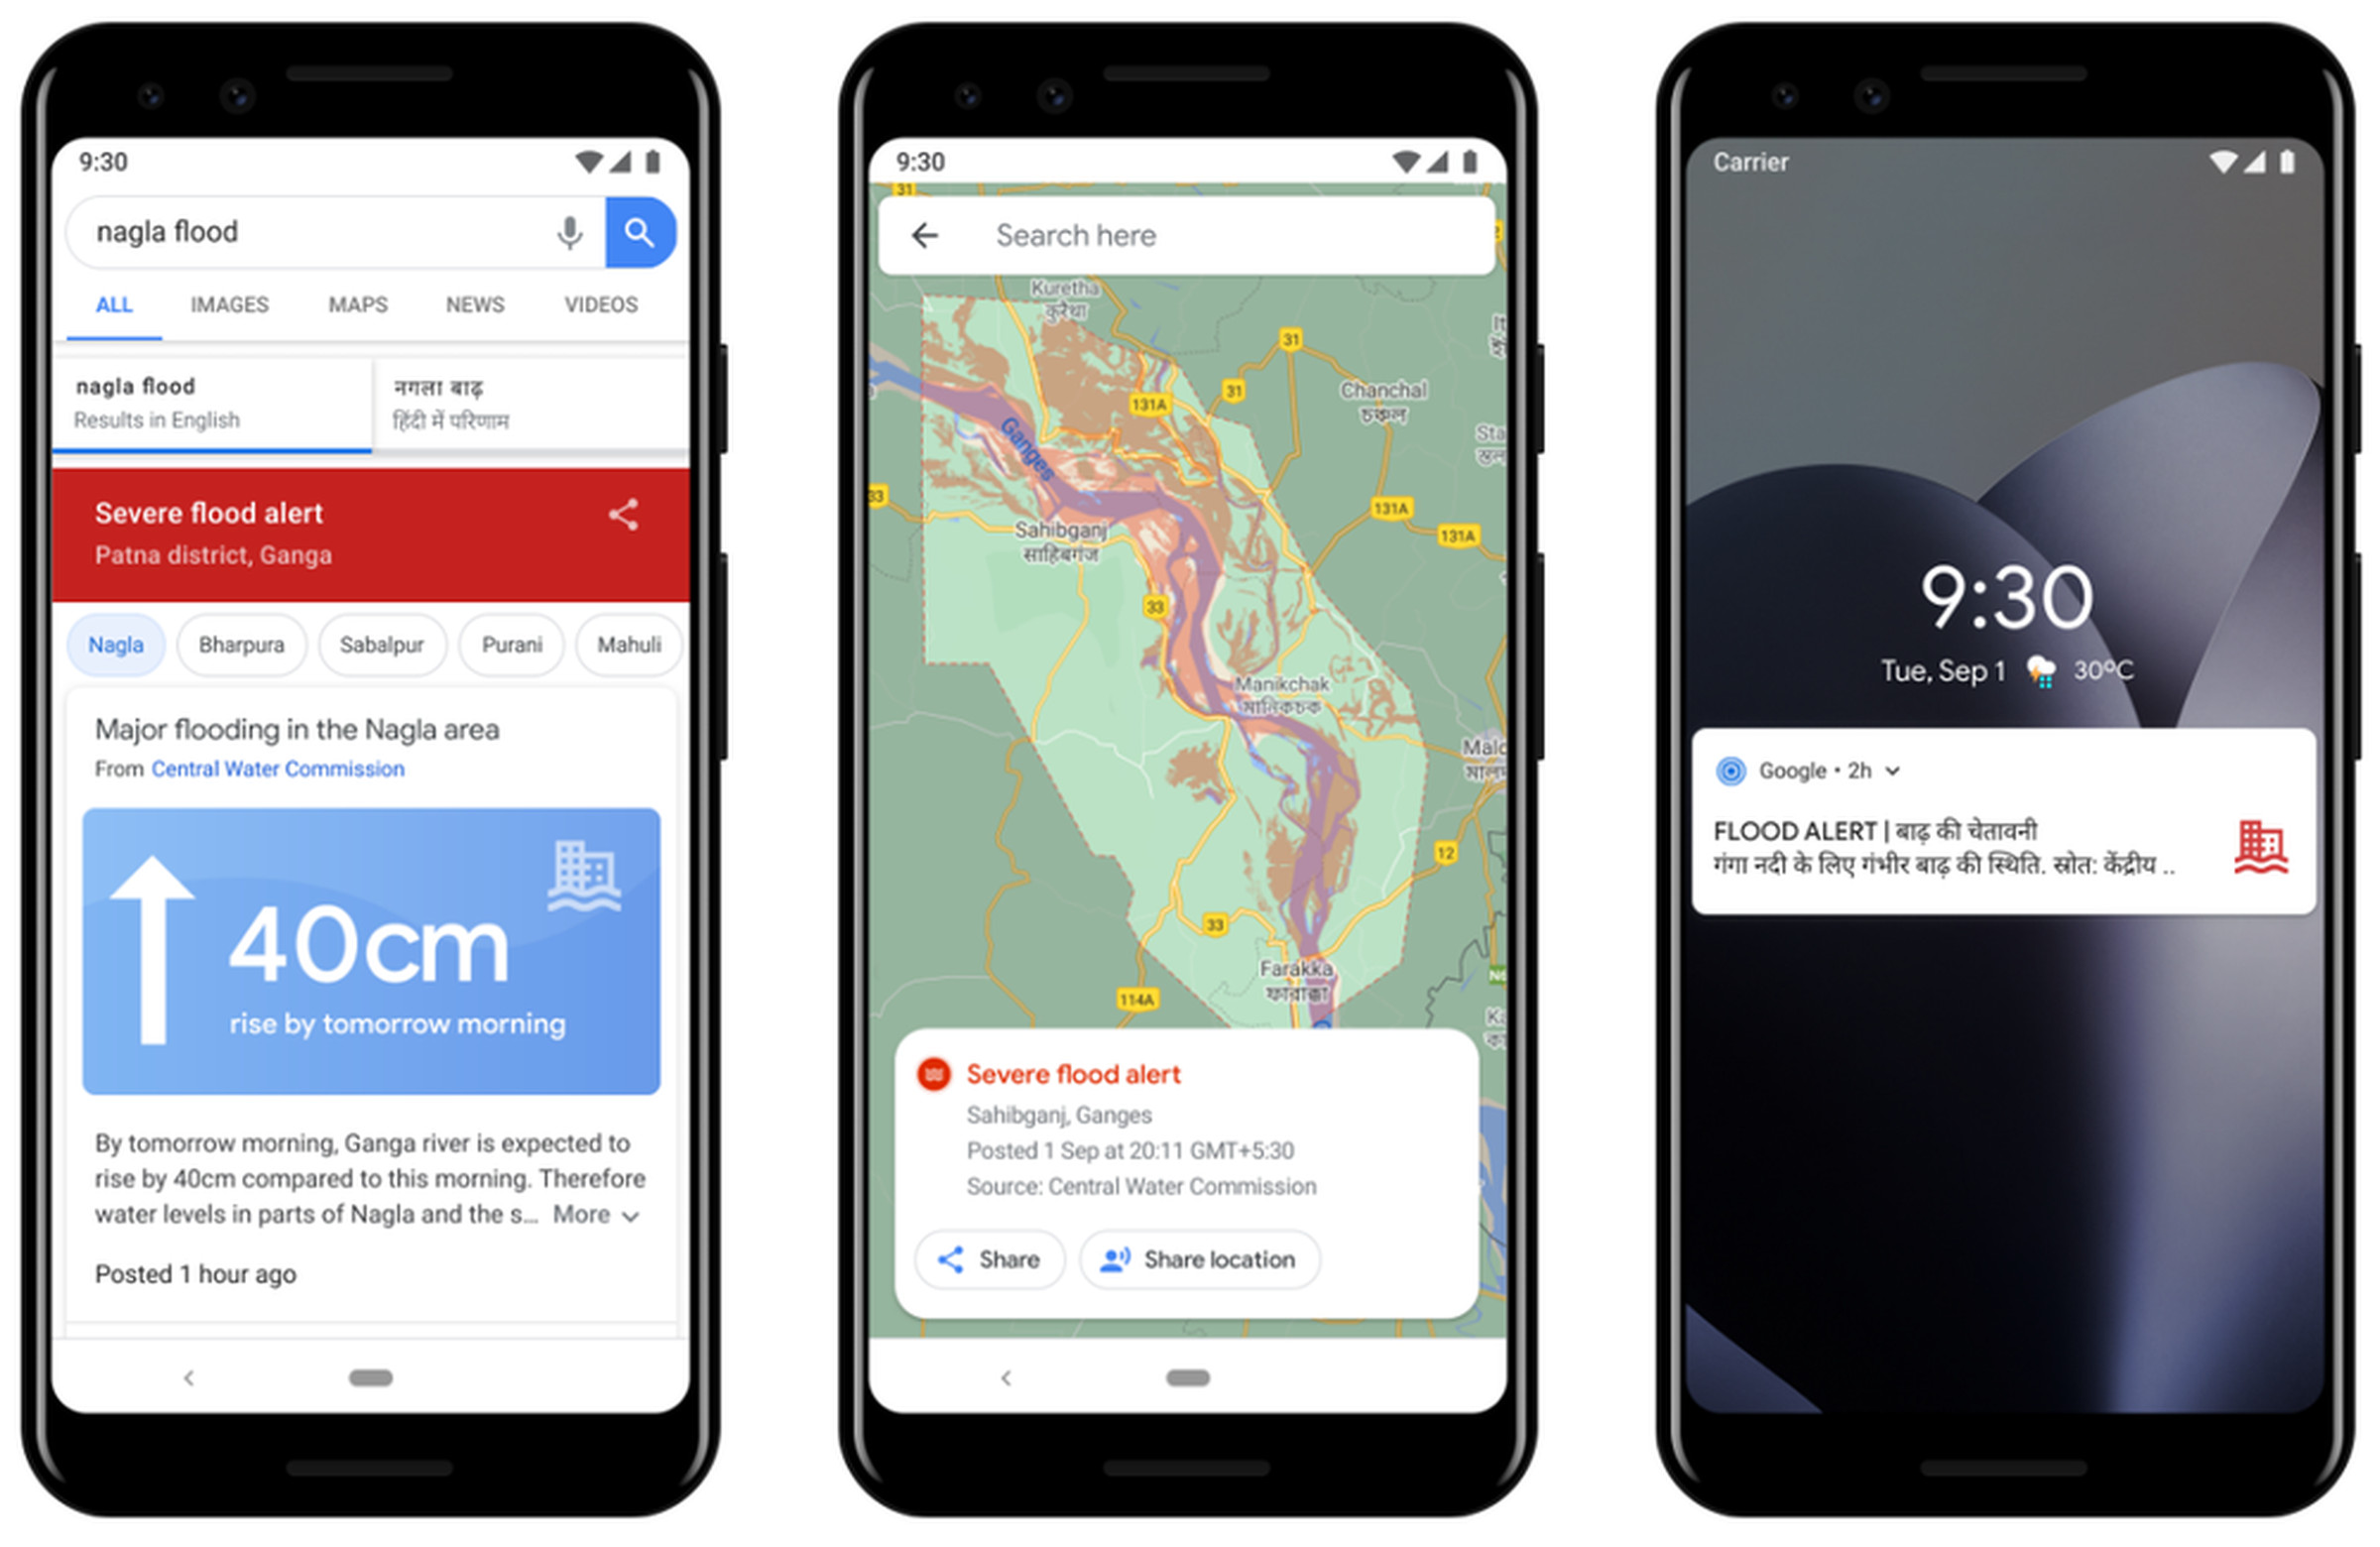 Google’s new flood alerts offer information in some areas about the depth of the waters.